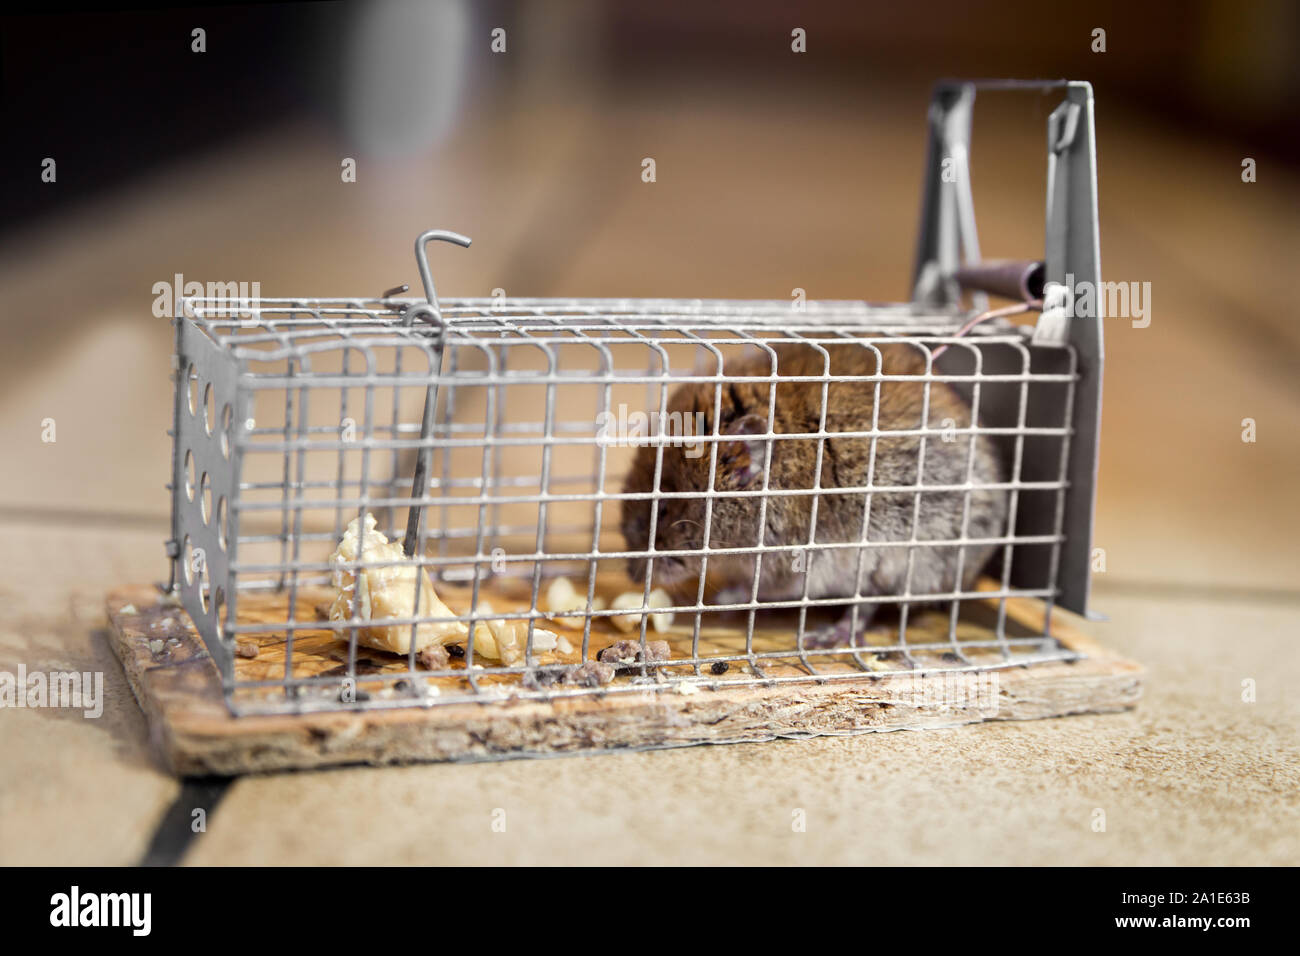 https://c8.alamy.com/comp/2A1E63B/mouse-in-a-live-capture-mousetrap-at-the-ground-of-the-kitchen-live-catch-trap-2A1E63B.jpg